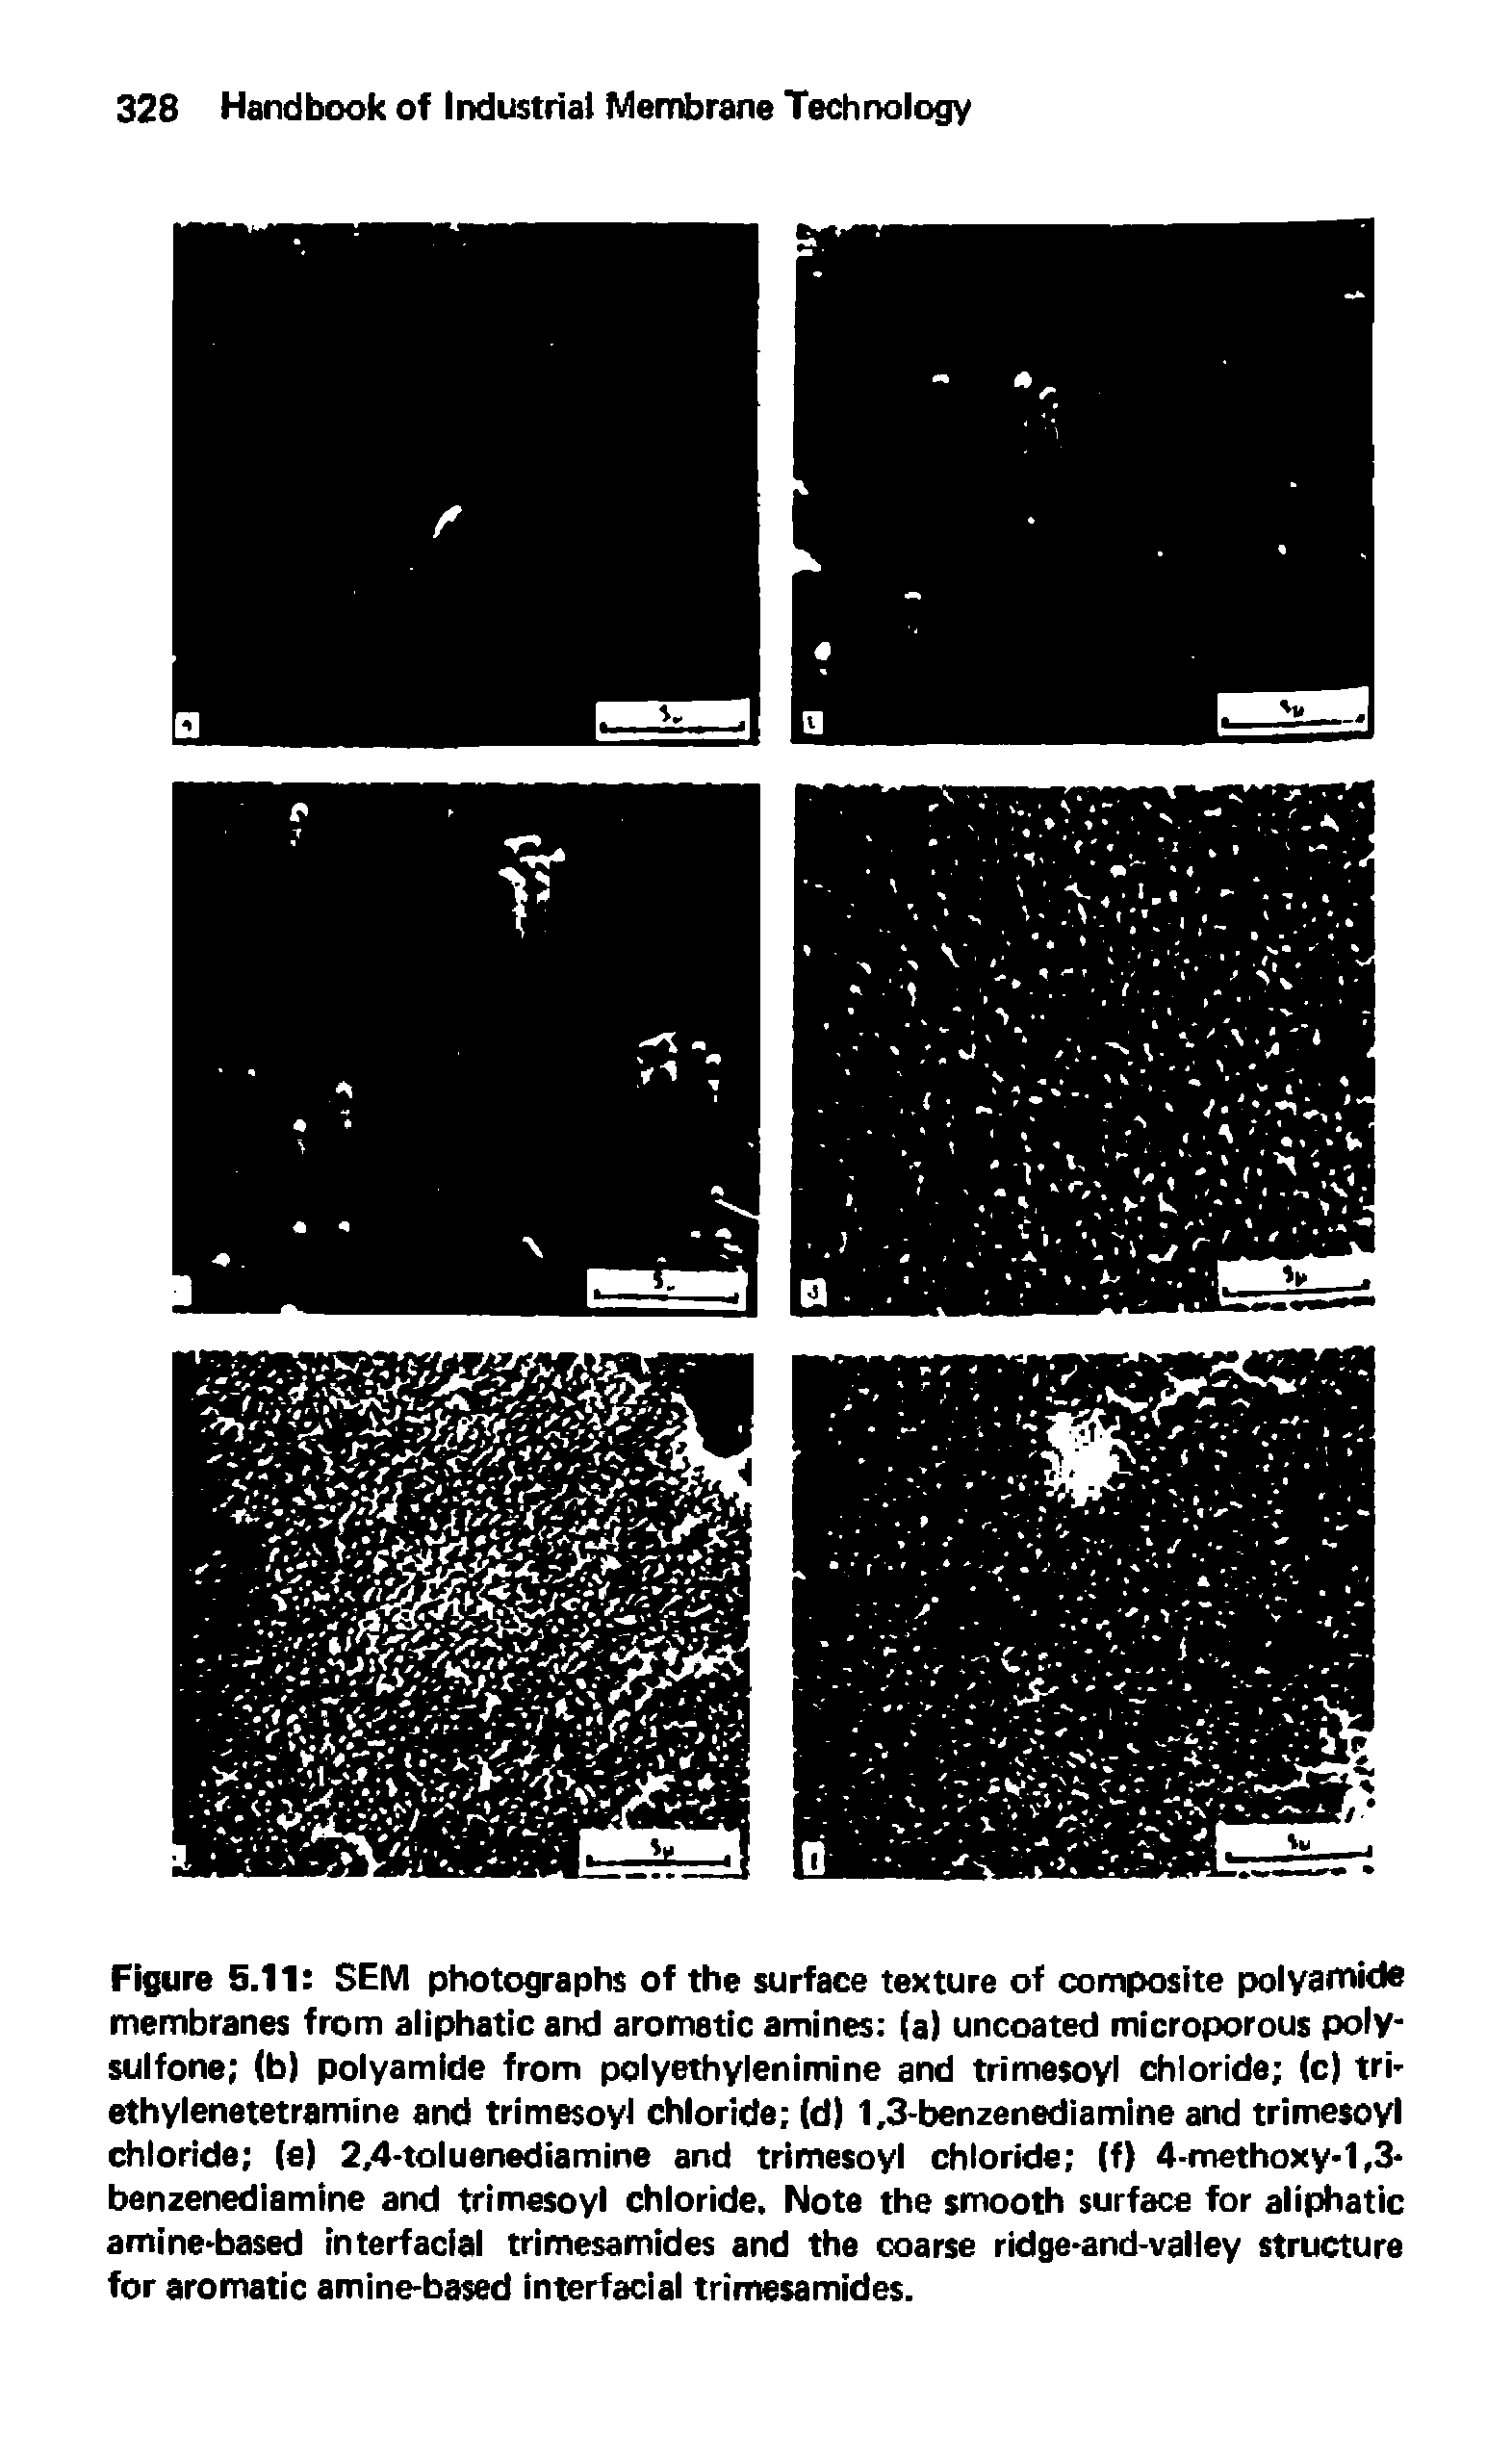 Figure 5.11 SEM photographs of the surface texture of composite polyamide membranes from aliphatic and aromatic amines (a) uncoated microporous poly-sulfone (b) polyamide from polyethylenimine and trimesoyl chloride (c) tri-ethylenetetramine and trimesoyl chloride (d) 1,3-benzenediamine and trimesoyl chloride (e) 2,4-toluenediamine and trimesoyl chloride (f) 4-methoxy-1,3-benzenediamine and trimesoyl chloride. Note the smooth surface for aliphatic amine-based interfacial trimesamides and the coarse ridge-and-valley structure for aromatic amine-based interfacial trimesamides.